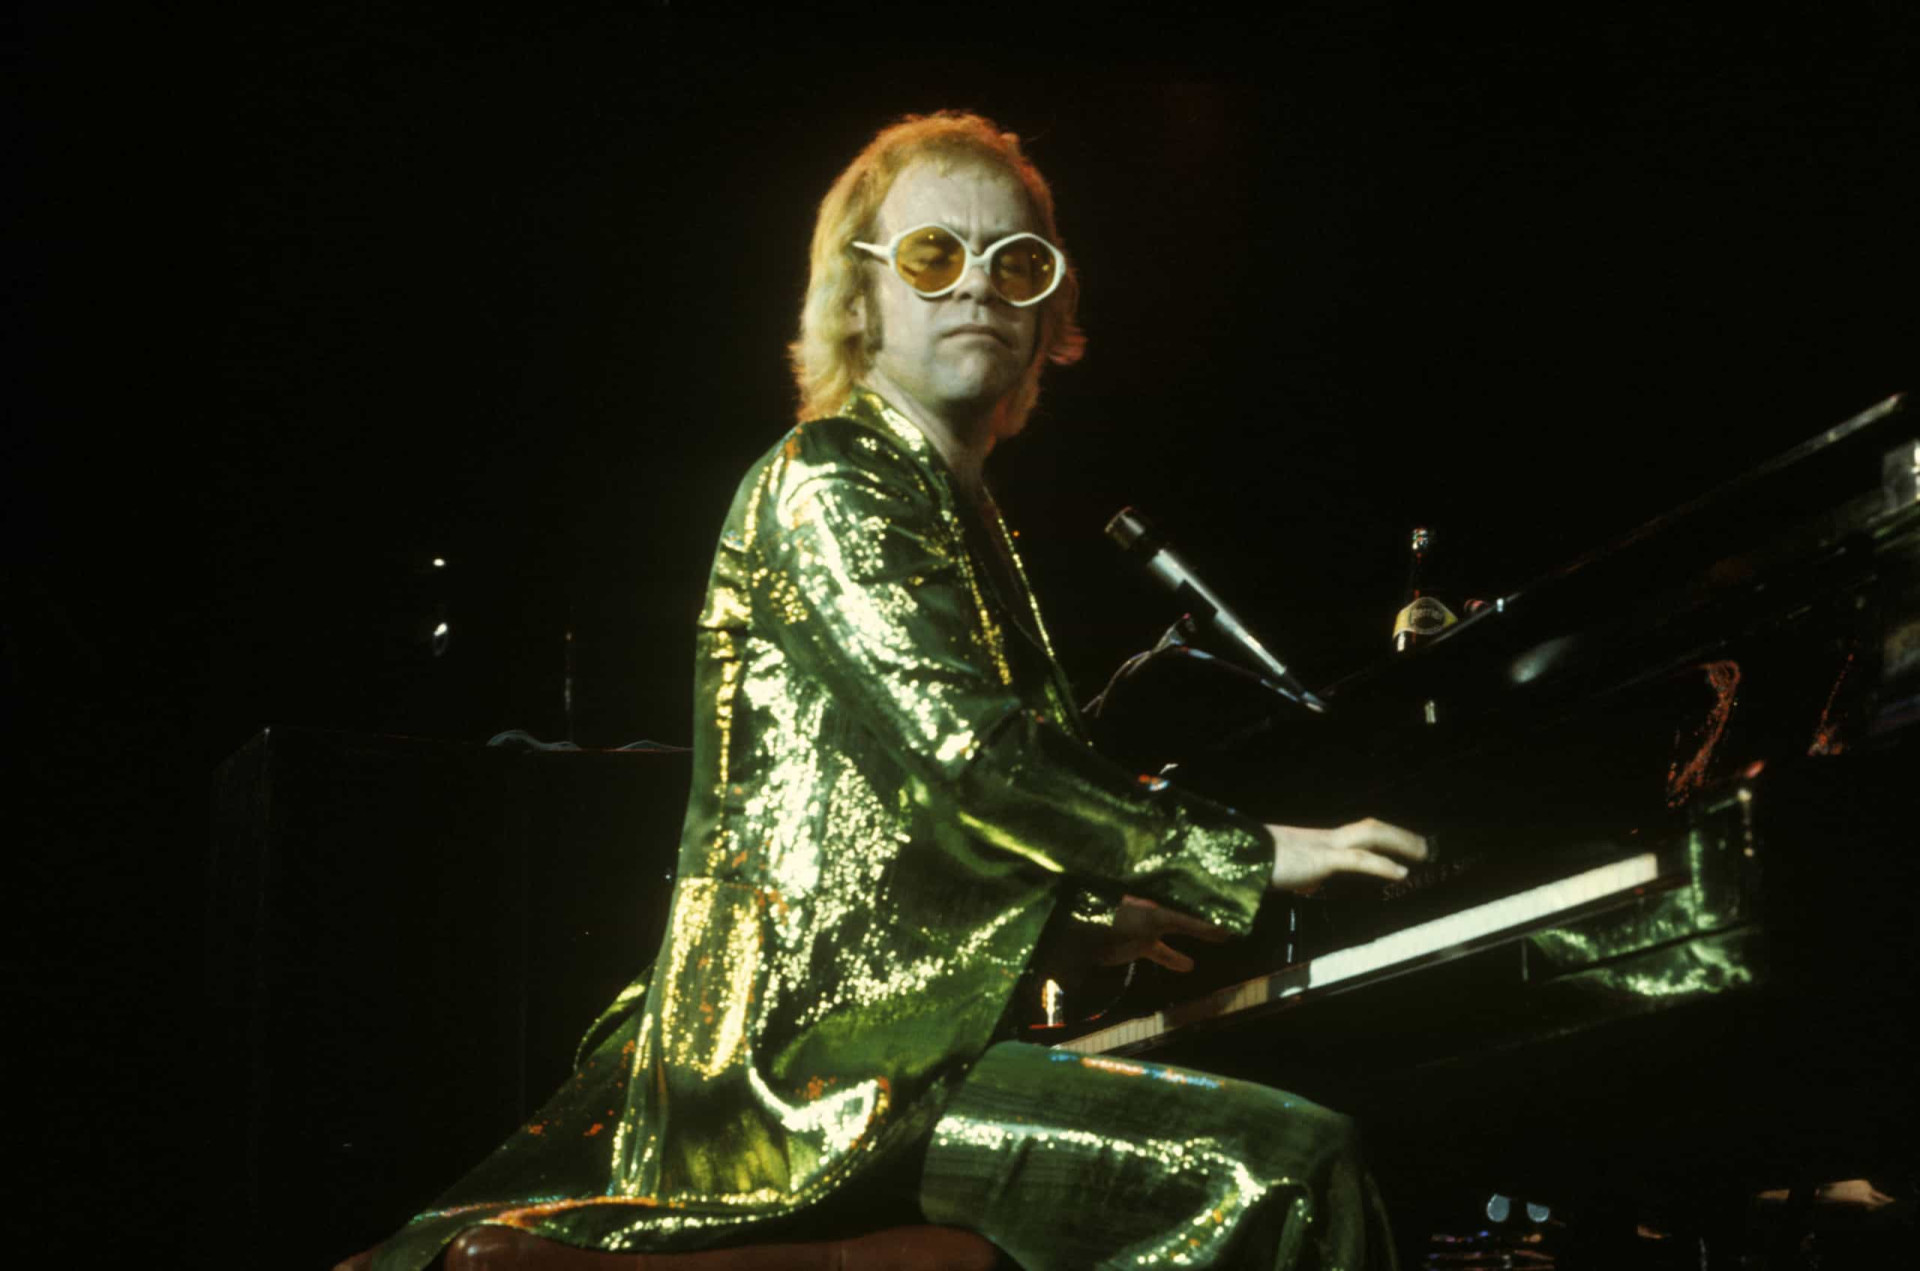 <p>'Crocodile Rock' was Elton John's first US no. 1 single, hitting the top spot on February 3, 1973. The track appears on the album 'Don't Shoot Me I'm Only the Piano Player.'</p><p>You may also like:<a href="https://www.starsinsider.com/n/223690?utm_source=msn.com&utm_medium=display&utm_campaign=referral_description&utm_content=603256en-my"> Iconic childhood experiences that kids today will never get to have</a></p>